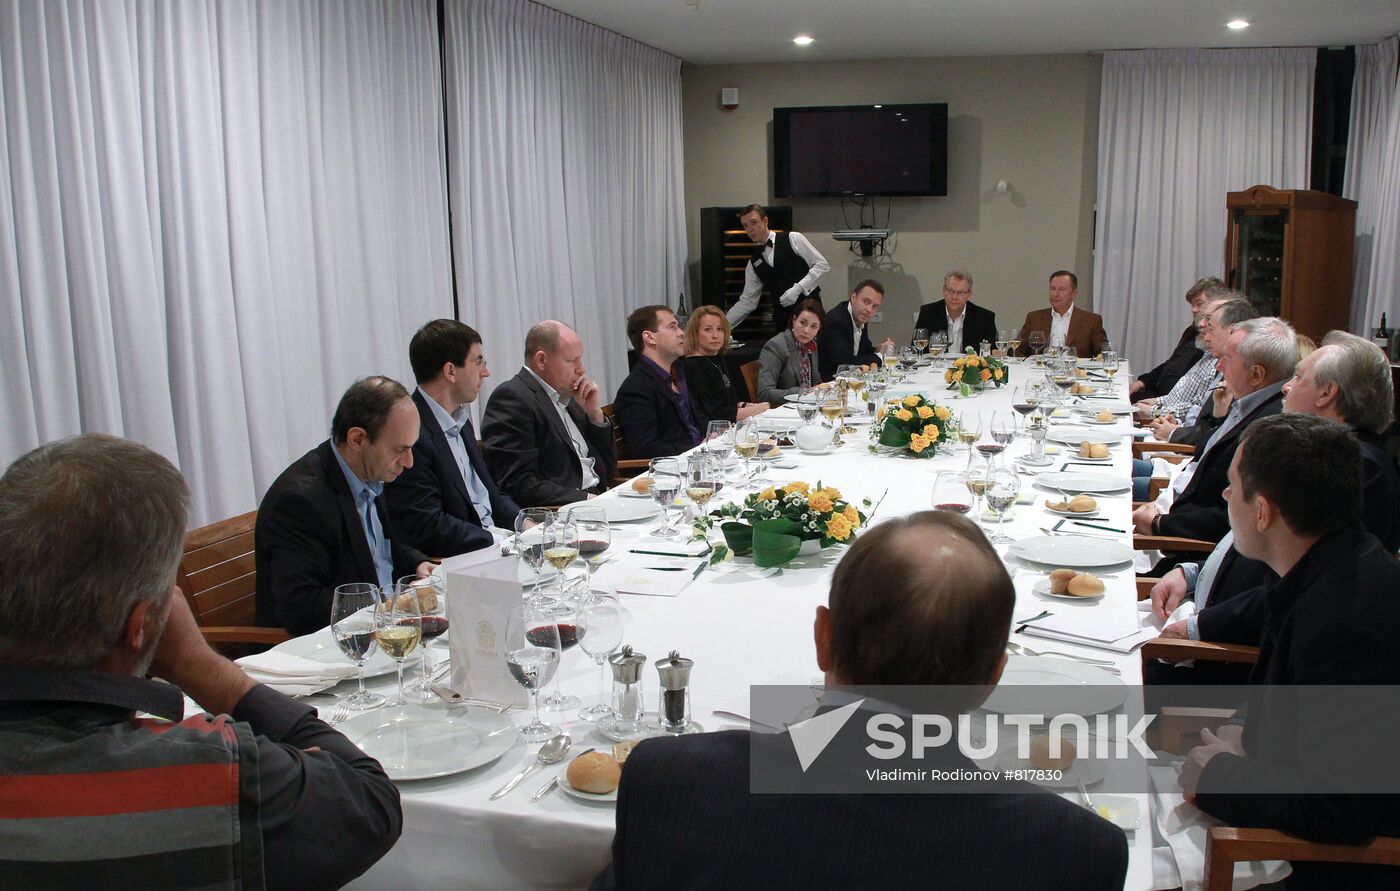 Dmitry Medvedev meets with mass media editors in chief